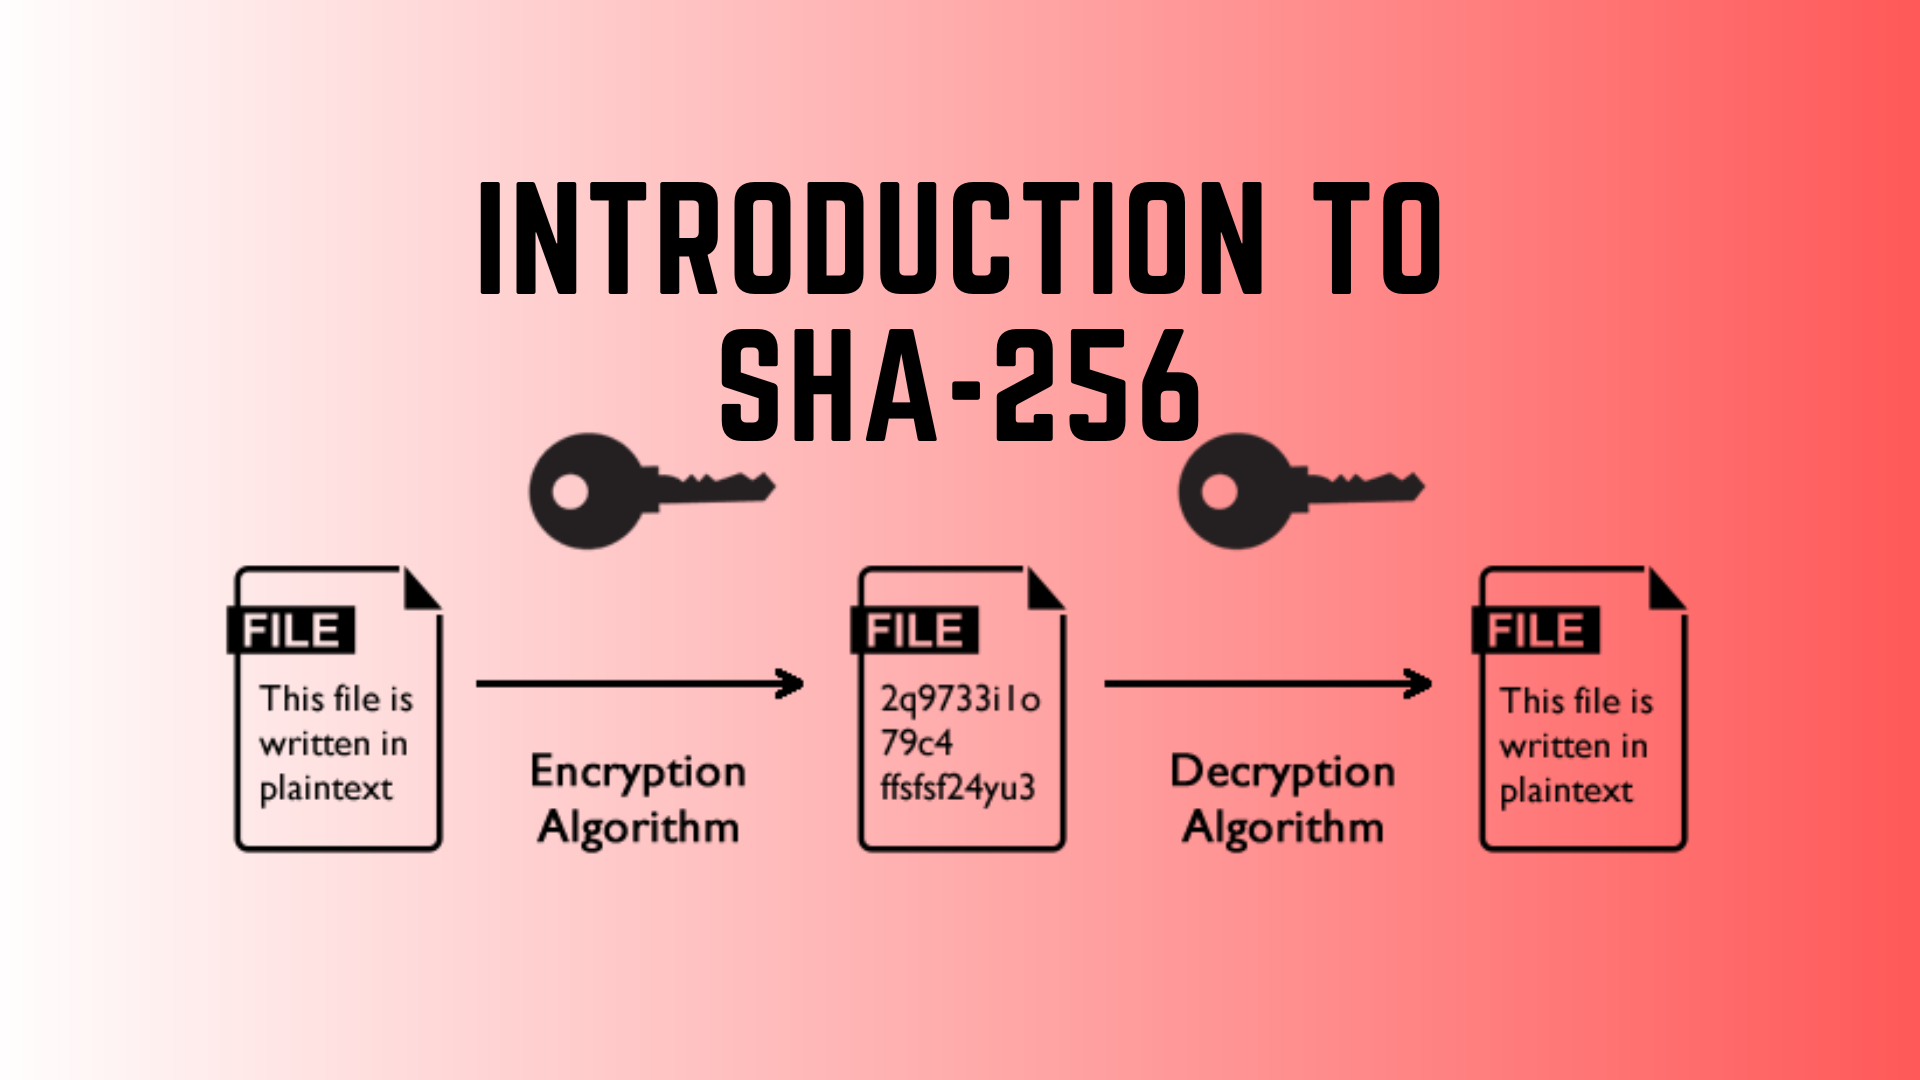 Introduction to SHA-256